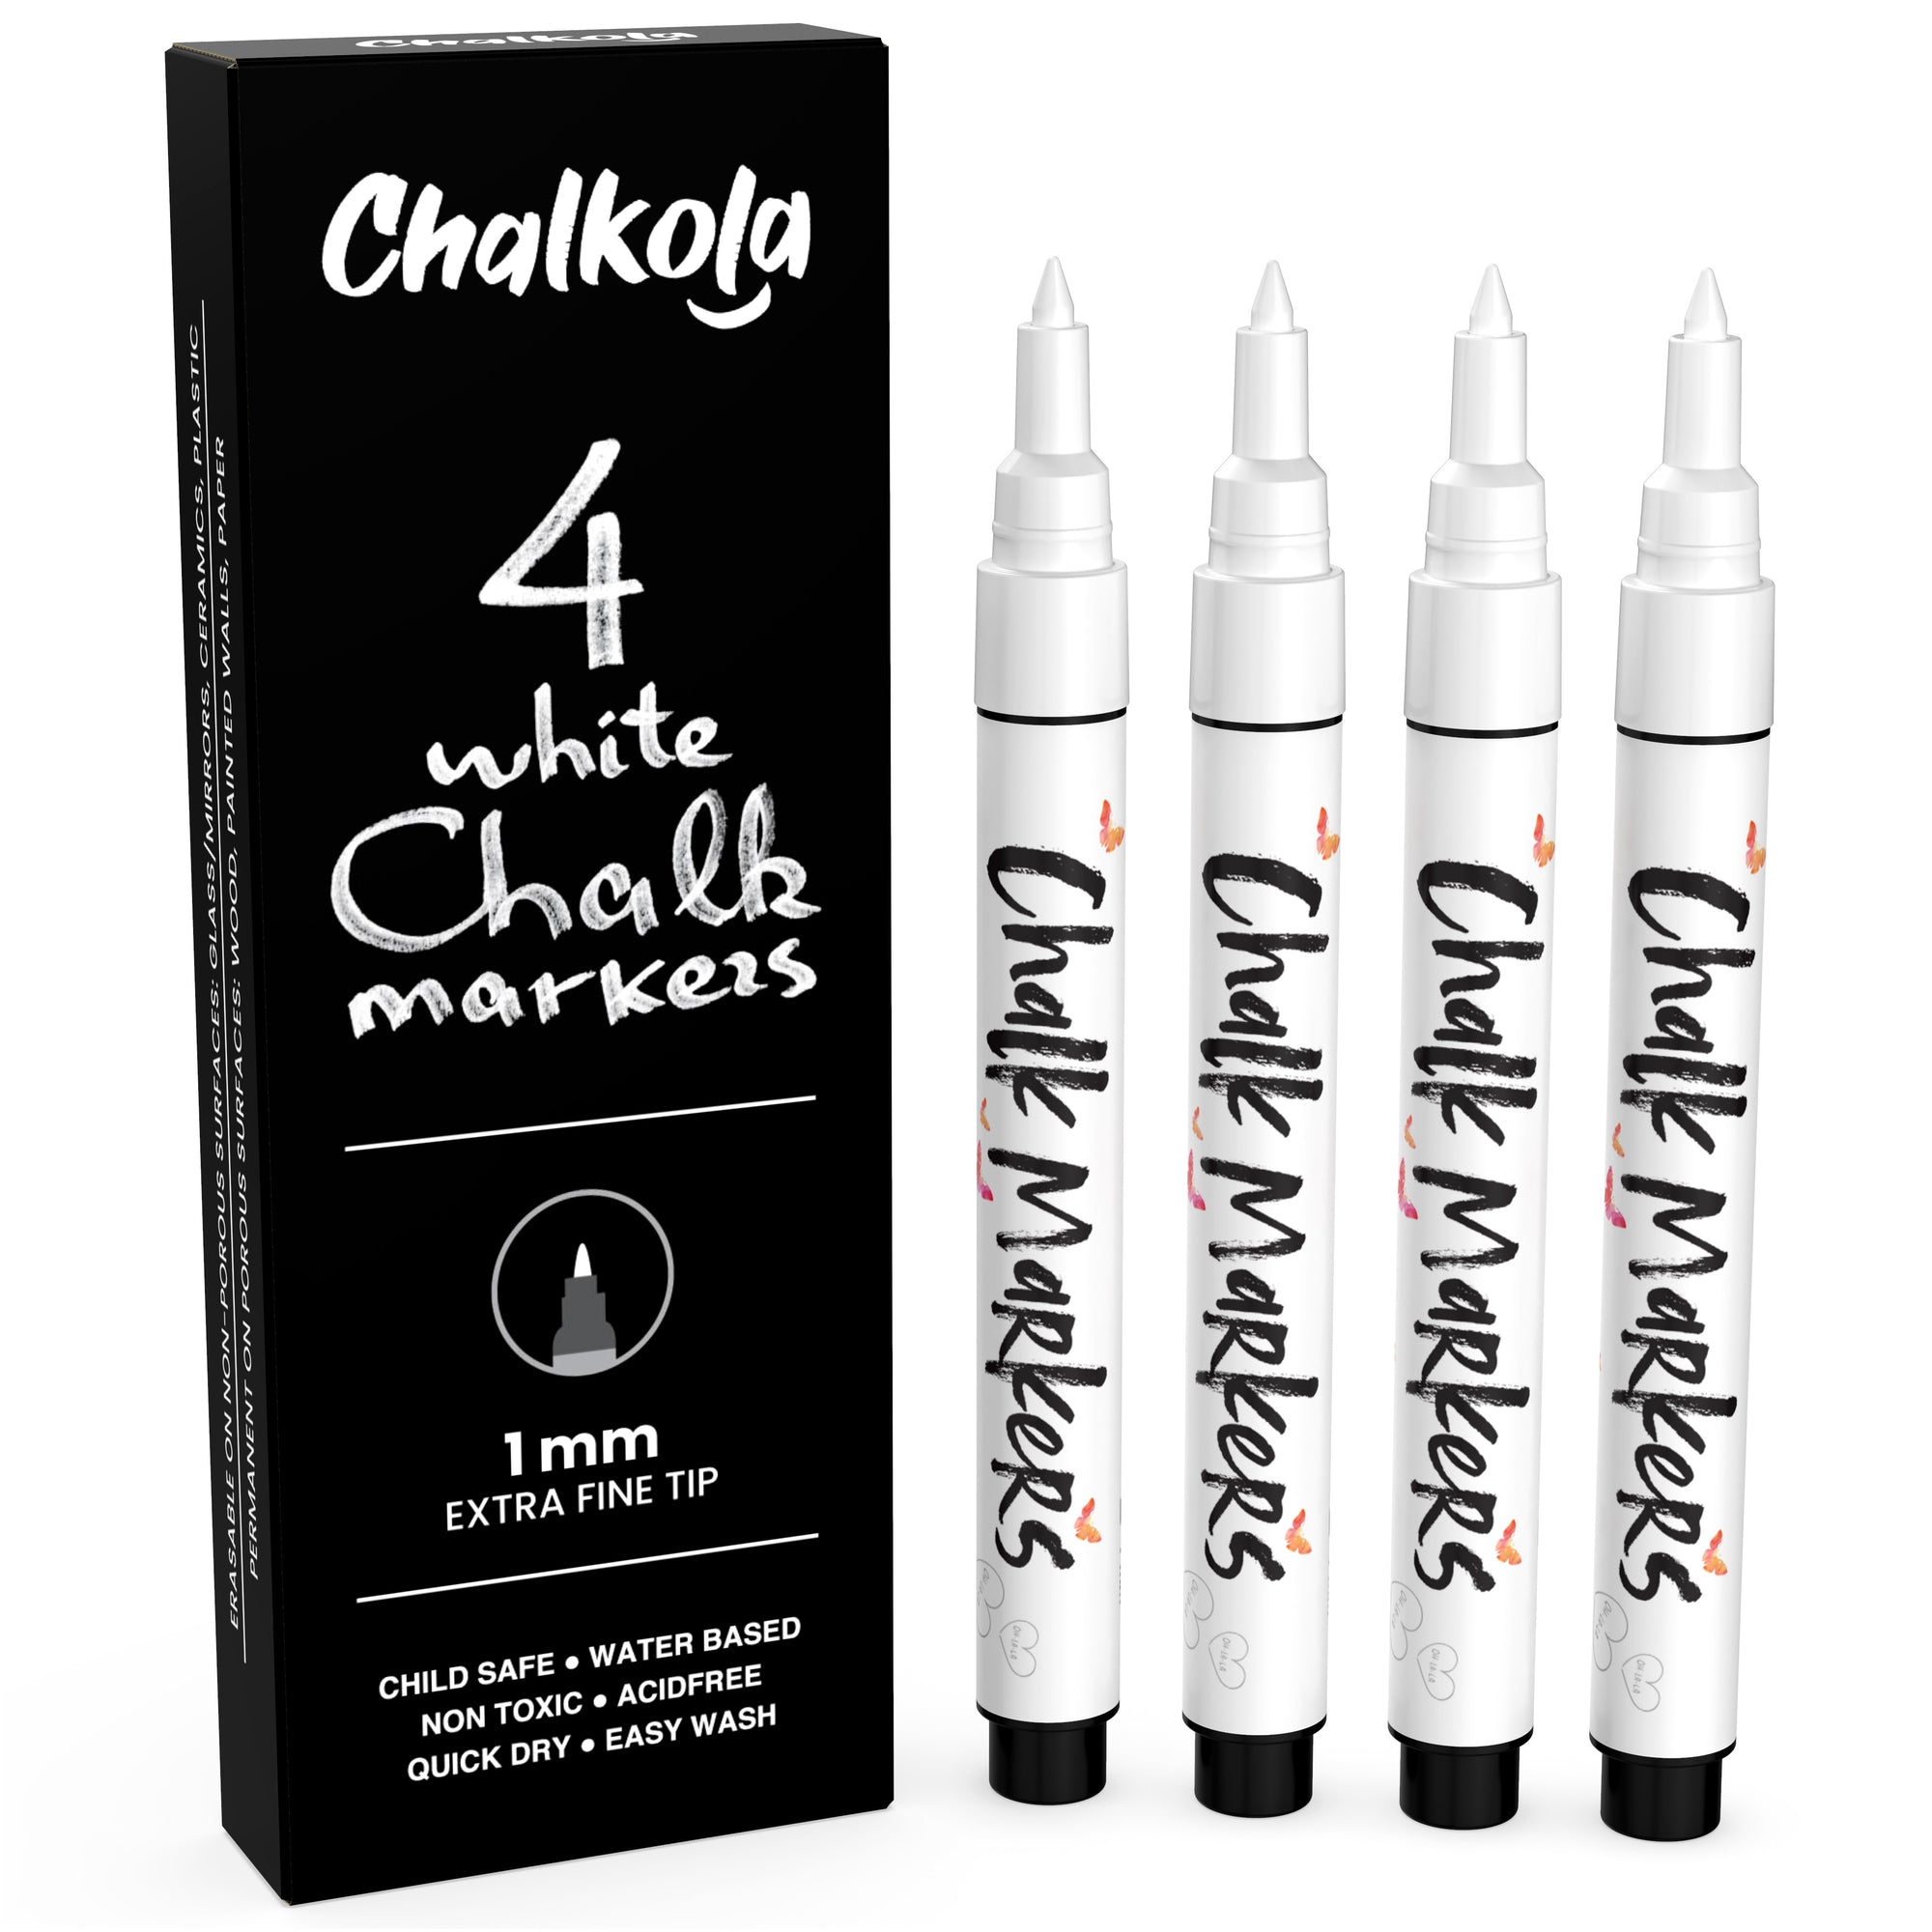 Chalkola - chalk markers  an honest review - Two Weeks Away